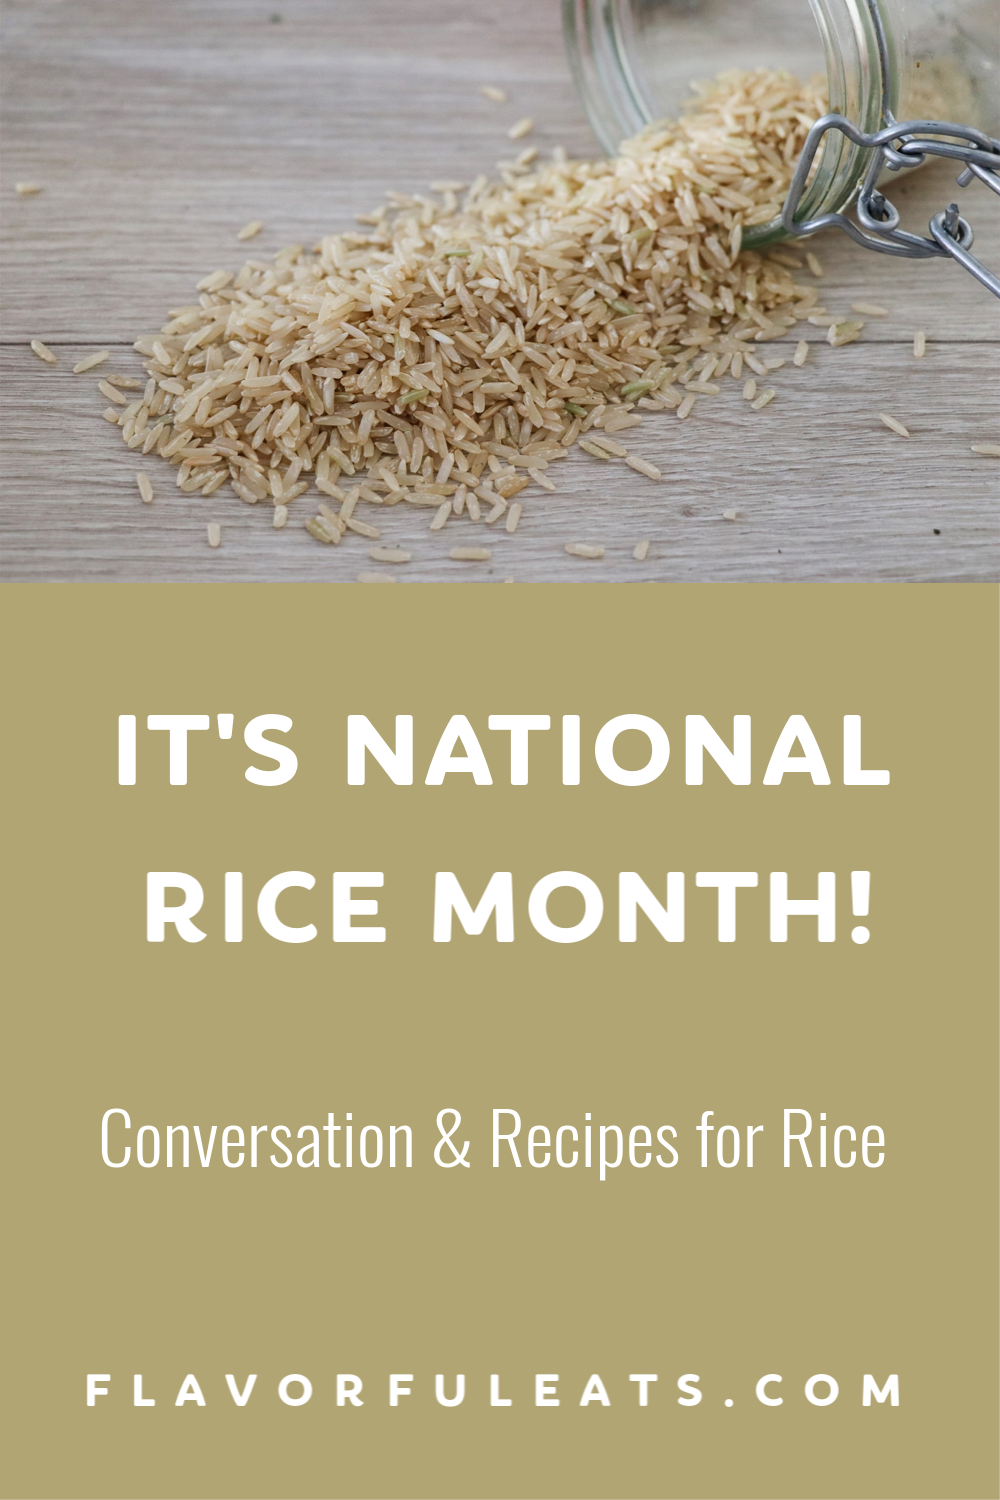 It’s National Rice Month!